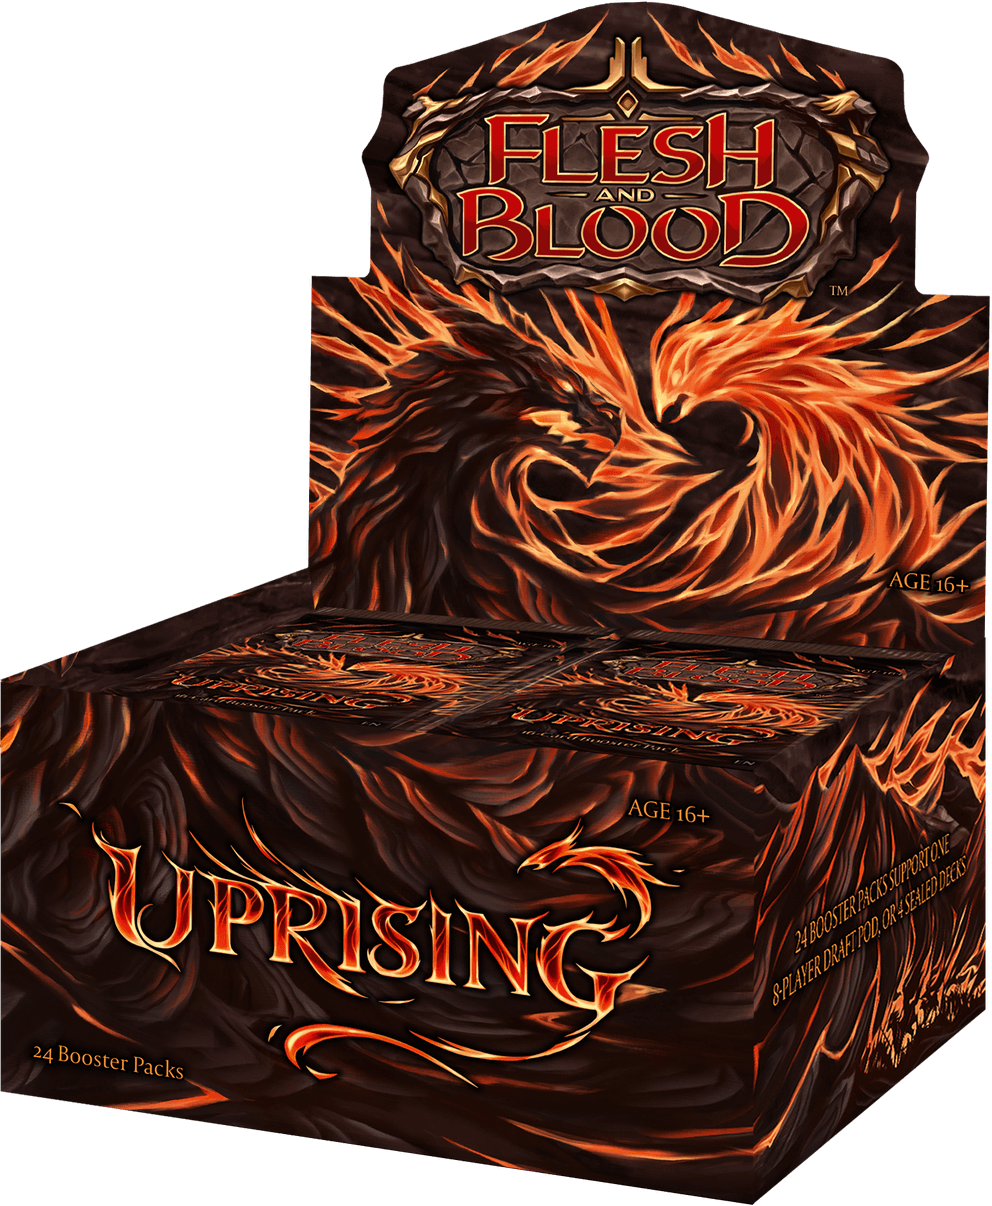 Flesh And Blood - Uprising - Booster Box (24 packs) - Hobby Champion Inc